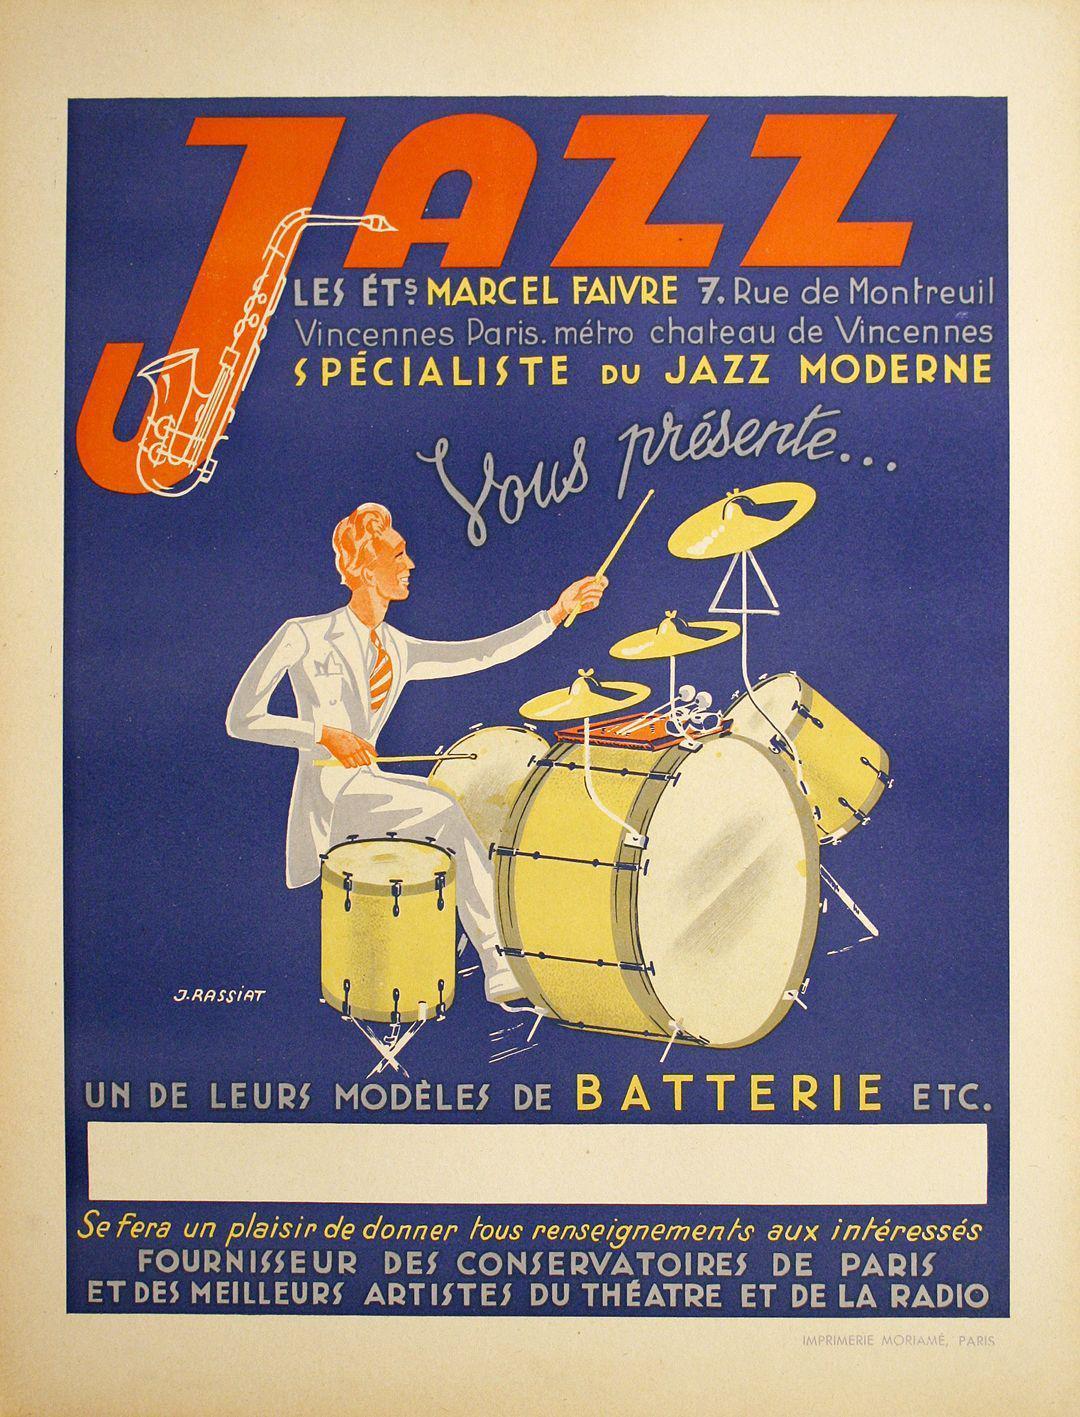 Original 1930's French Vintage Jazz Poster Featuring a Drummer by James Rassiat